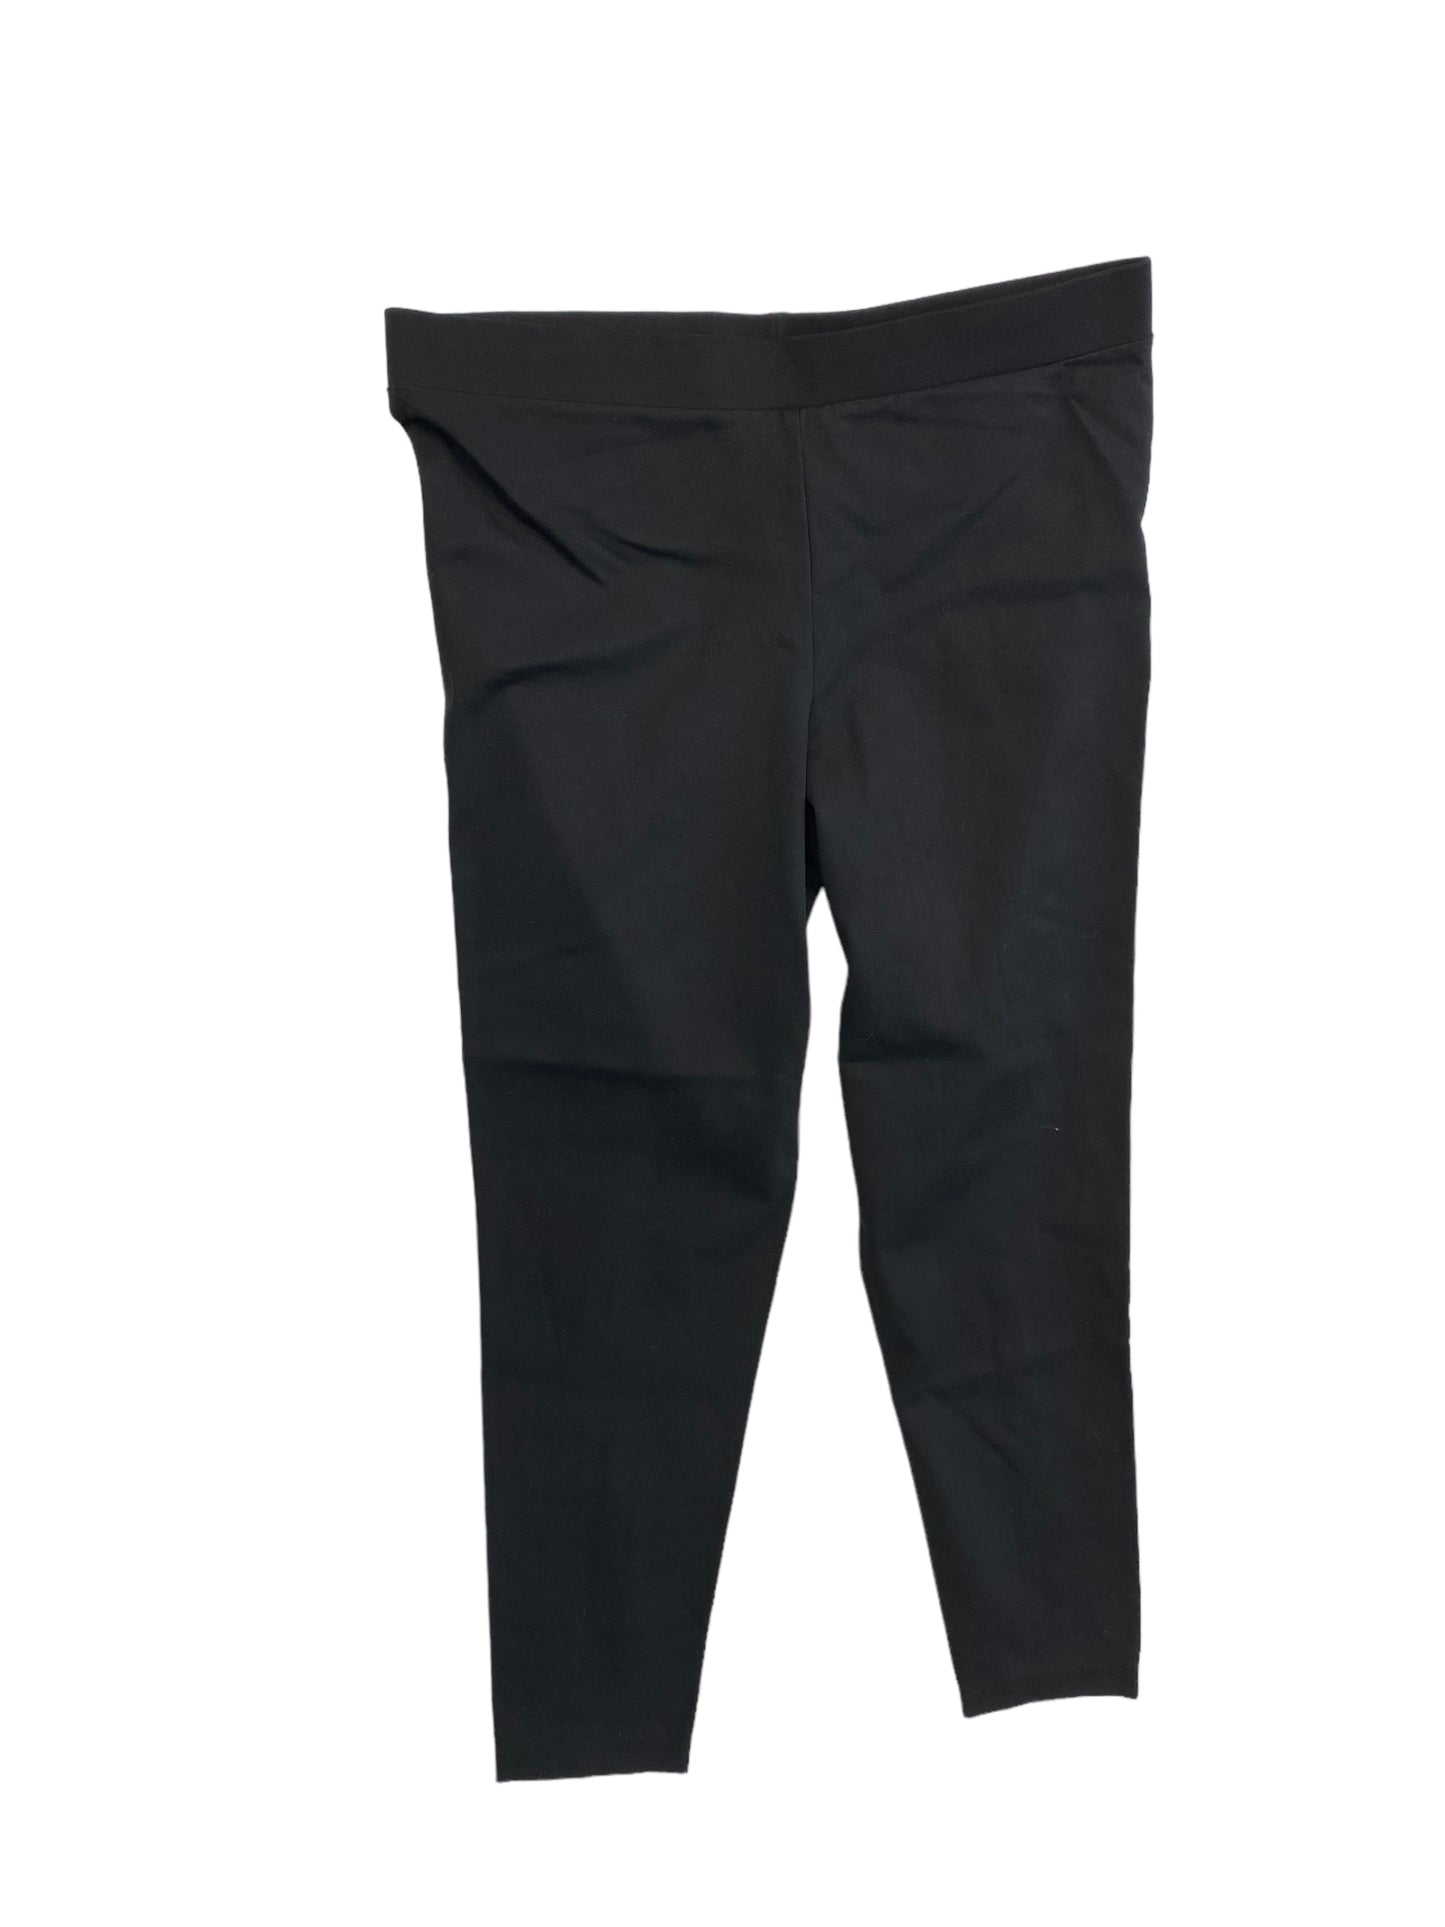 Black Pants Other Vince Camuto, Size Xl